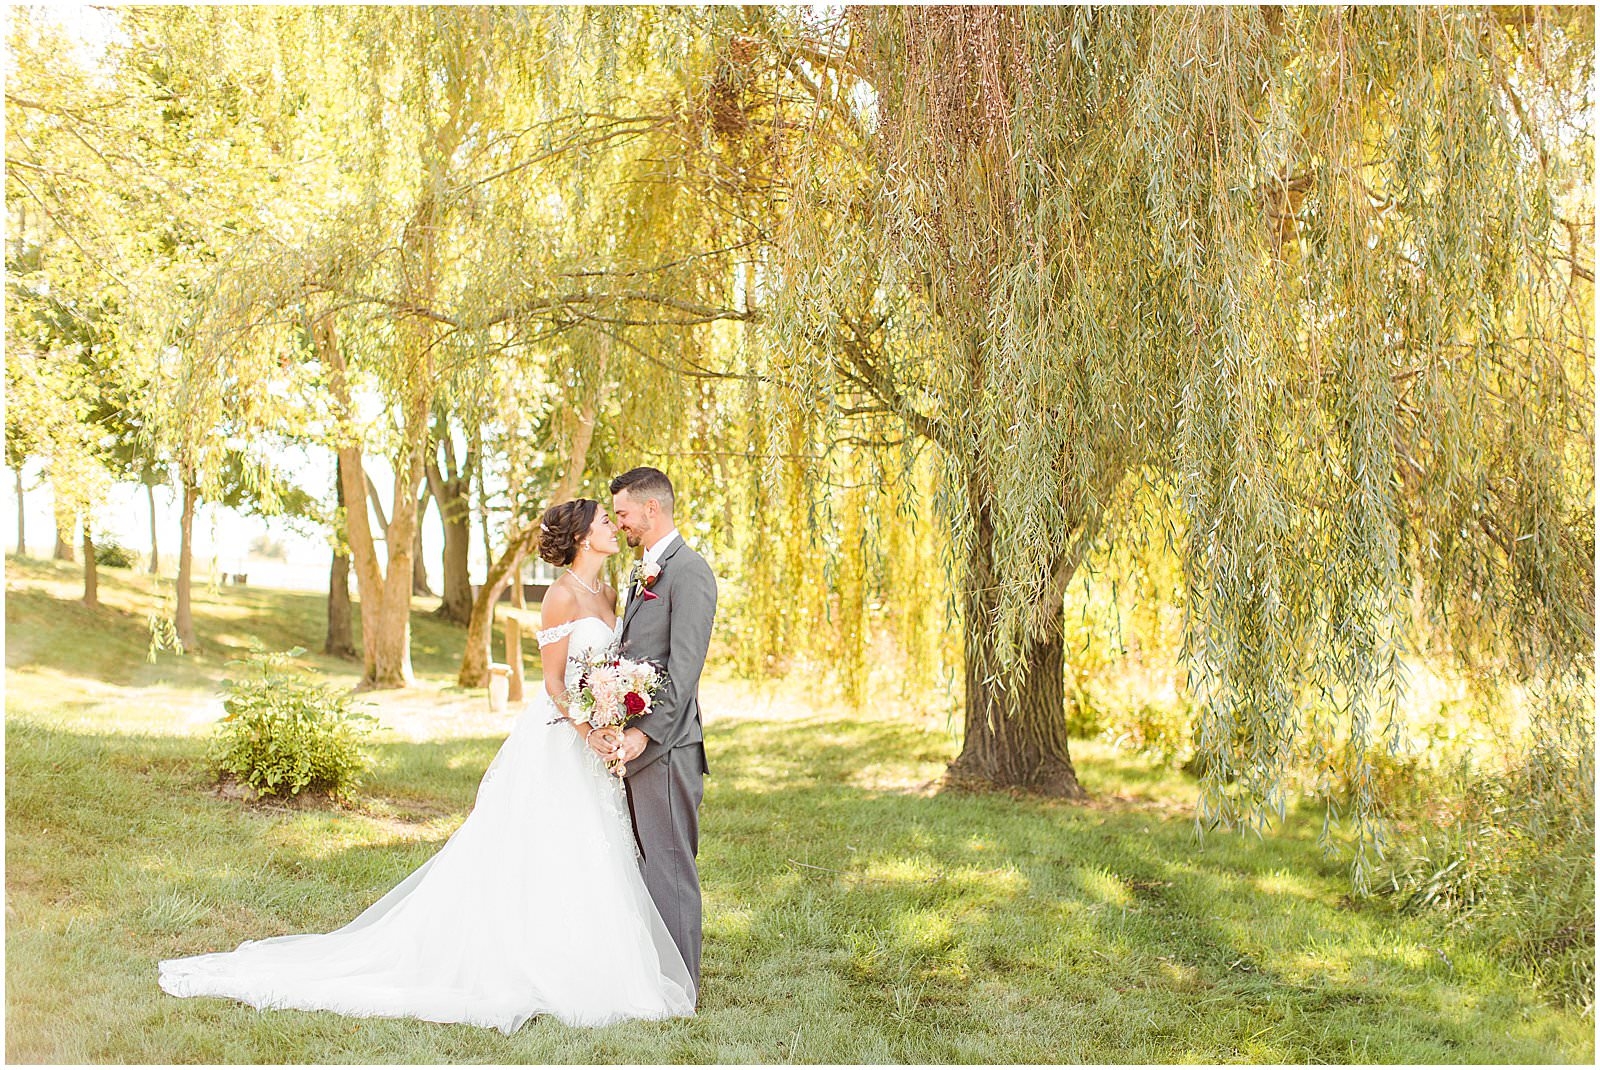 A Stunning Fall Wedding in Indianapolis, IN |. Sally and Andrew | Bret and Brandie Photography 0058.jpg